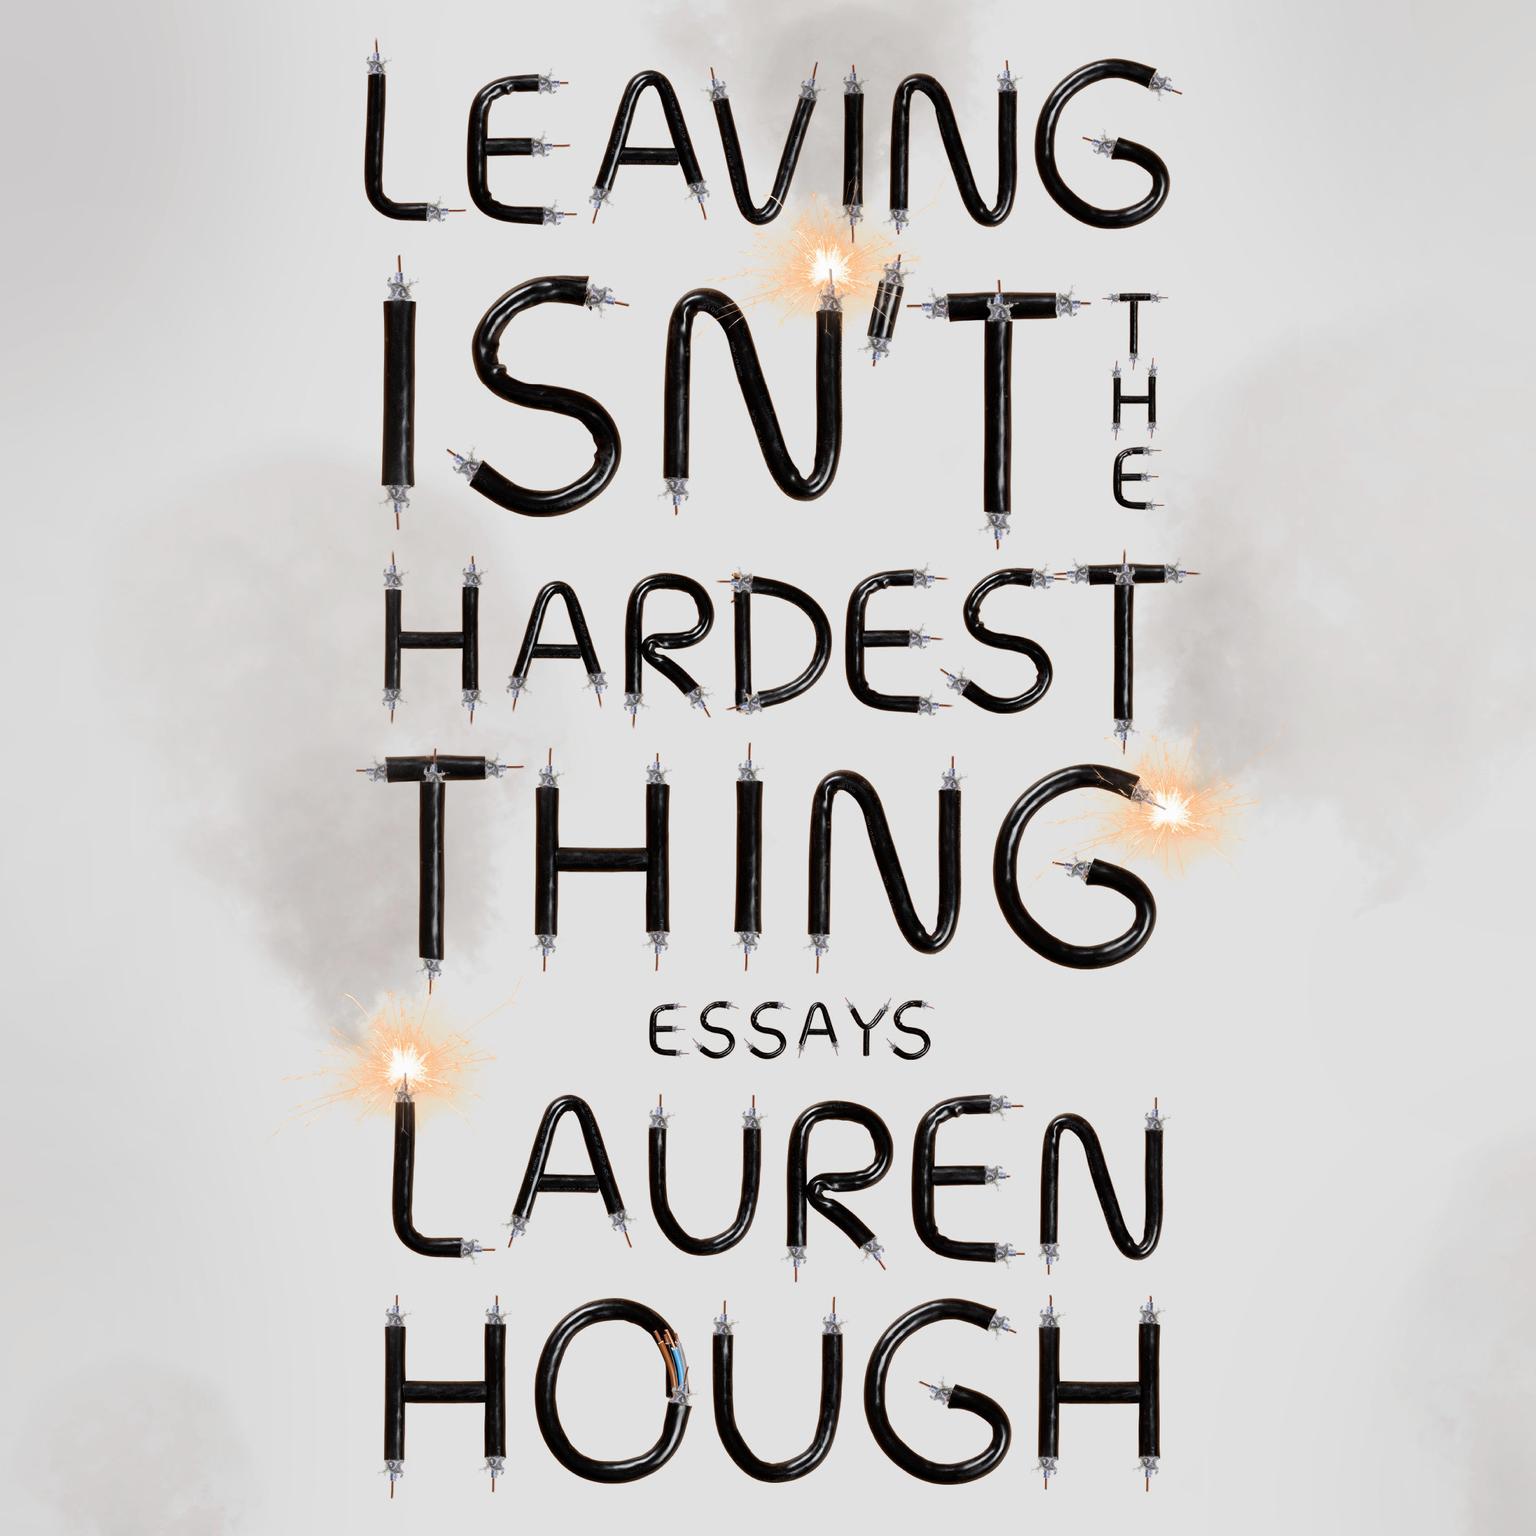 Leaving Isnt the Hardest Thing: Essays Audiobook, by Lauren Hough